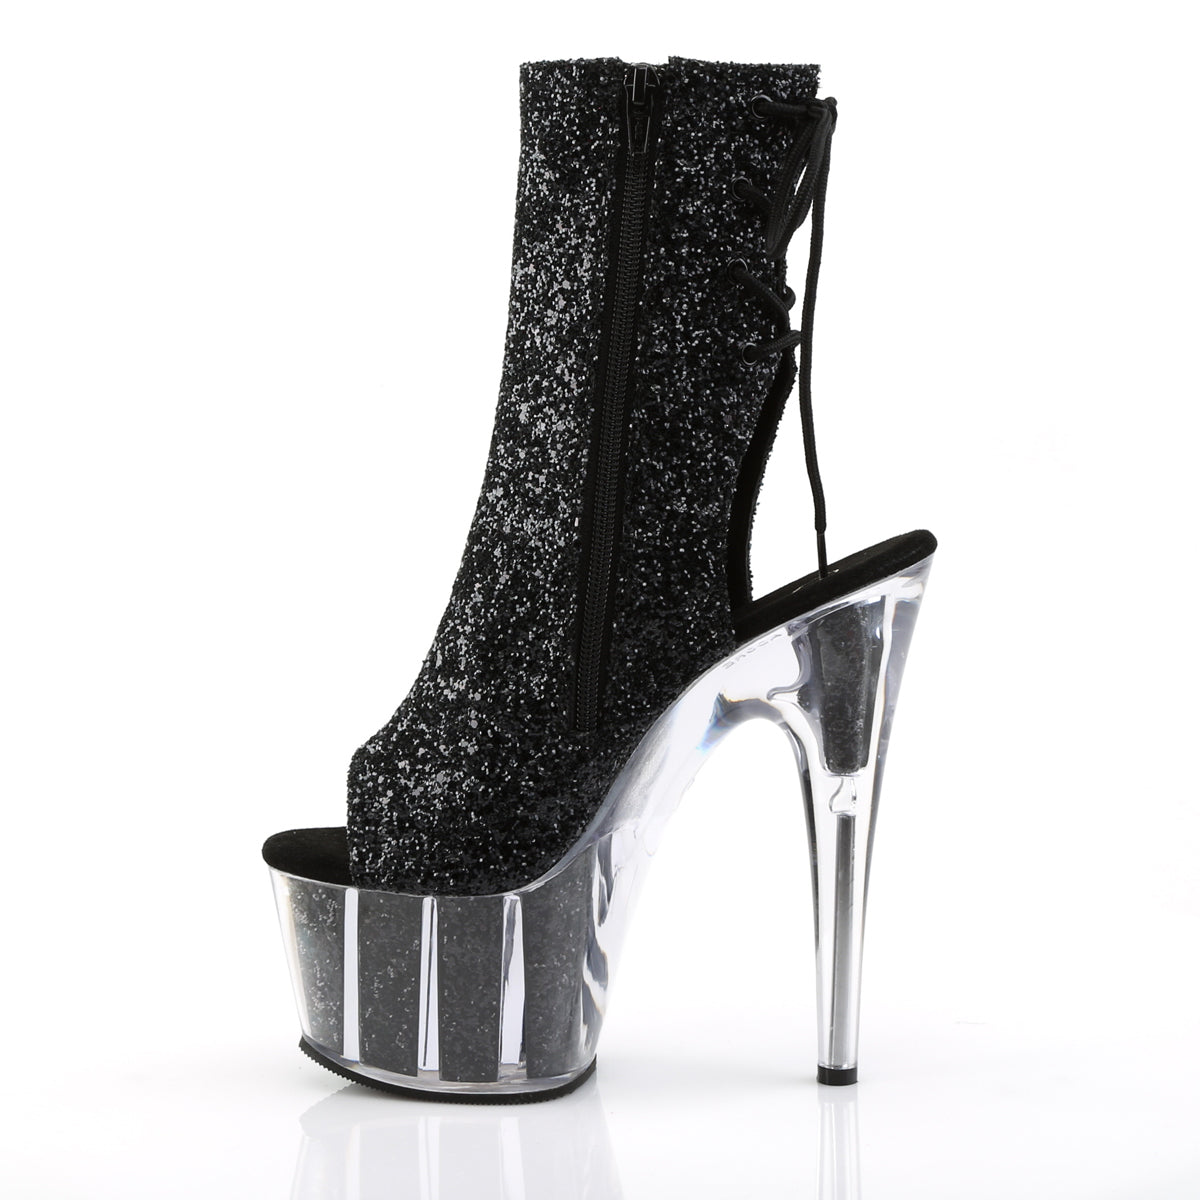 ADORE-1018G 7 Inch Heel Black Glitter Strippers Ankle Boots-Pleaser- Sexy Shoes Pole Dance Heels